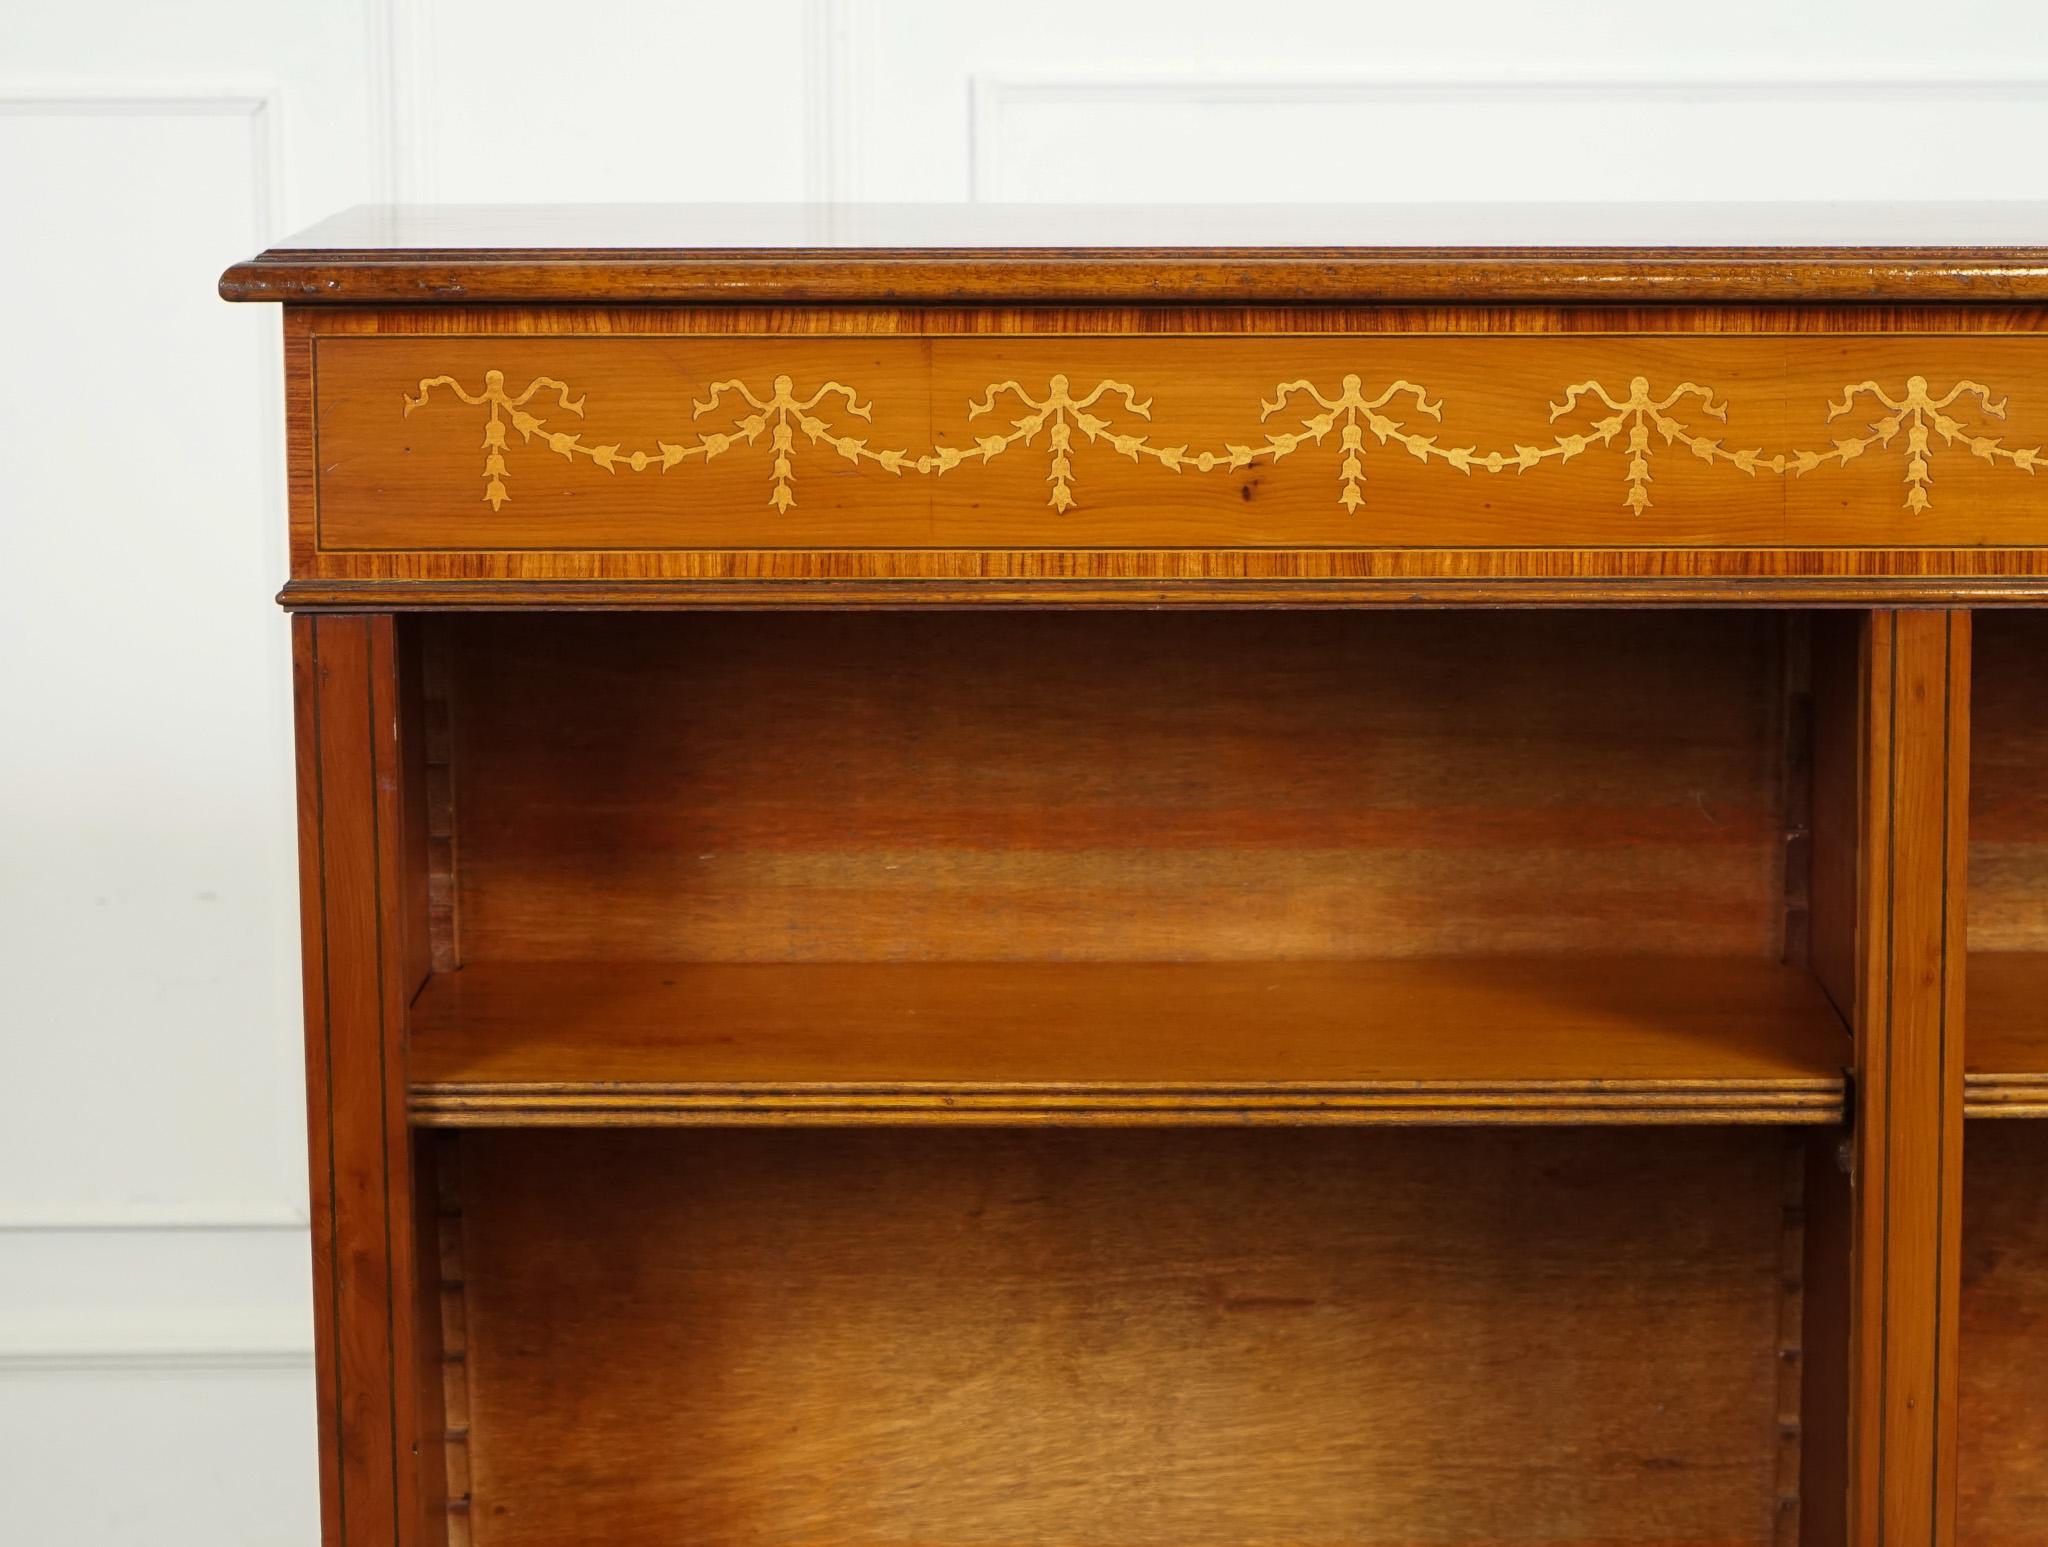 
We are delighted to offer for sale this Beautiful Yew Wood Double Dwarf Open Bookcase.

A vintage Yew wood double dwarf open bookcase with Sheraton inlay on the front is a classic and sophisticated piece of furniture that exudes elegance and charm.